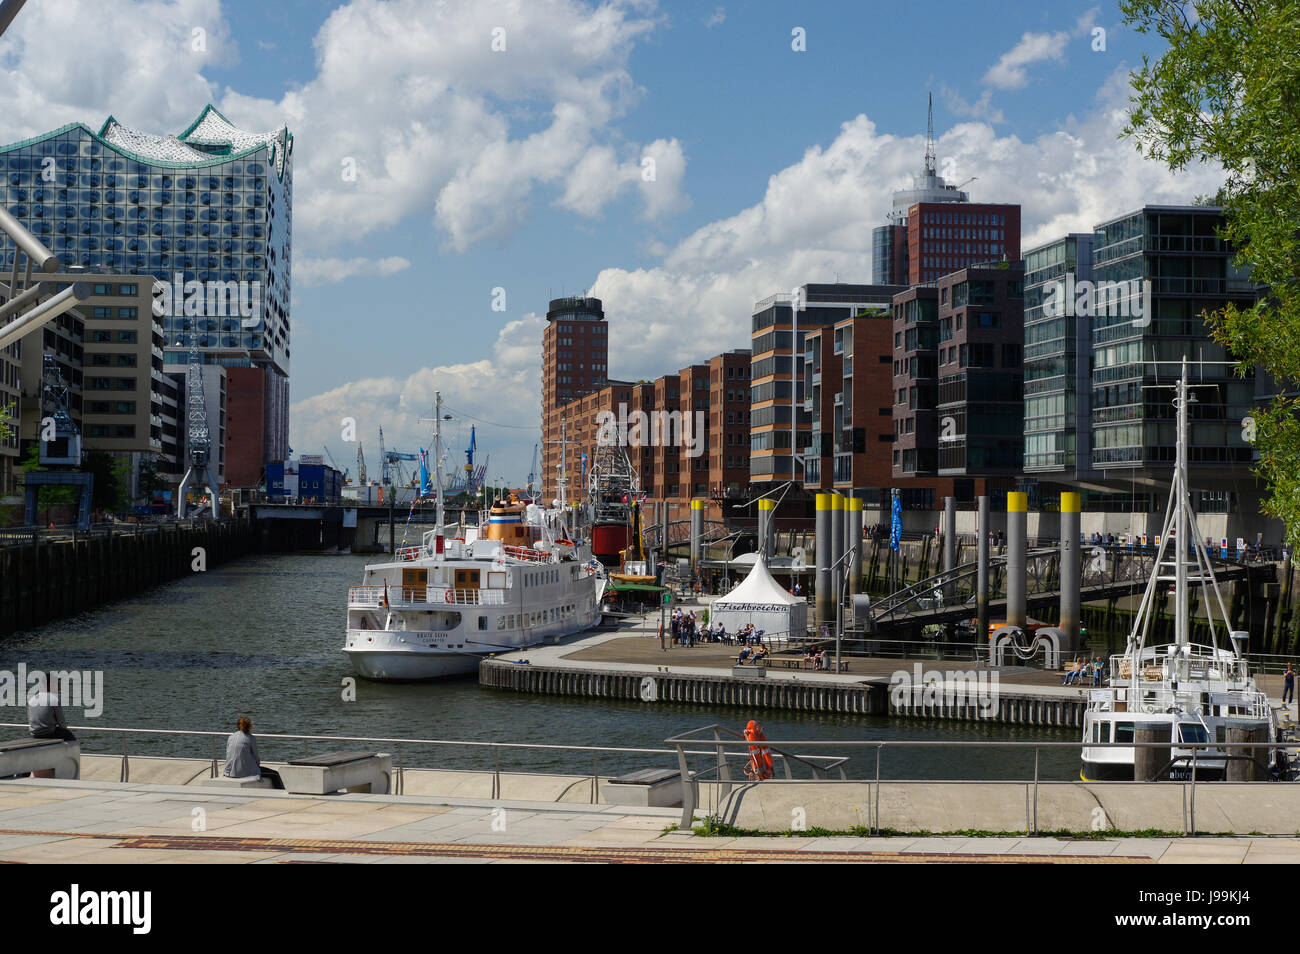 HAMBURG, GERMANY - JULY 18, 2015: the canal of Historic Speicherstadt houses and bridges at evening with amaising skyview over warehouses, famous place Elbe river. Stock Photo